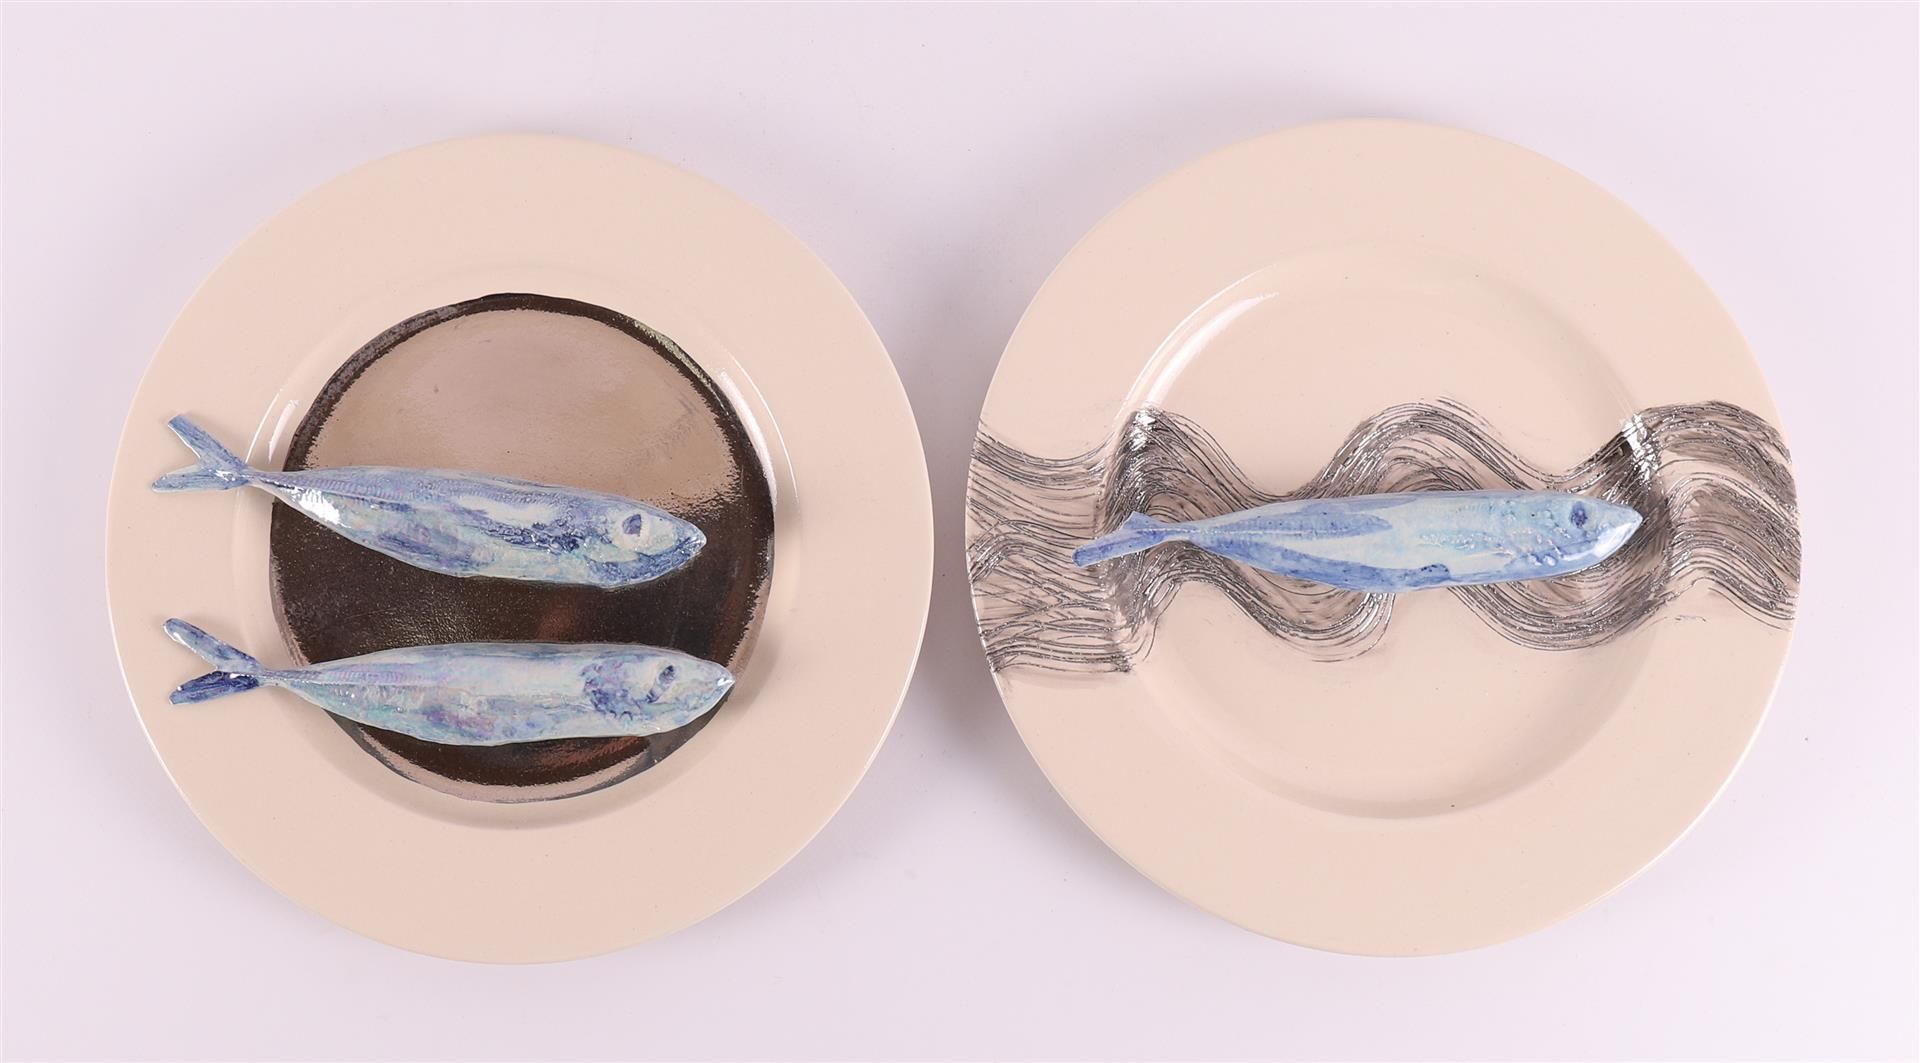 Veenland, Sibrich (https://www.sibrichveenland.com/). Two plates with fish